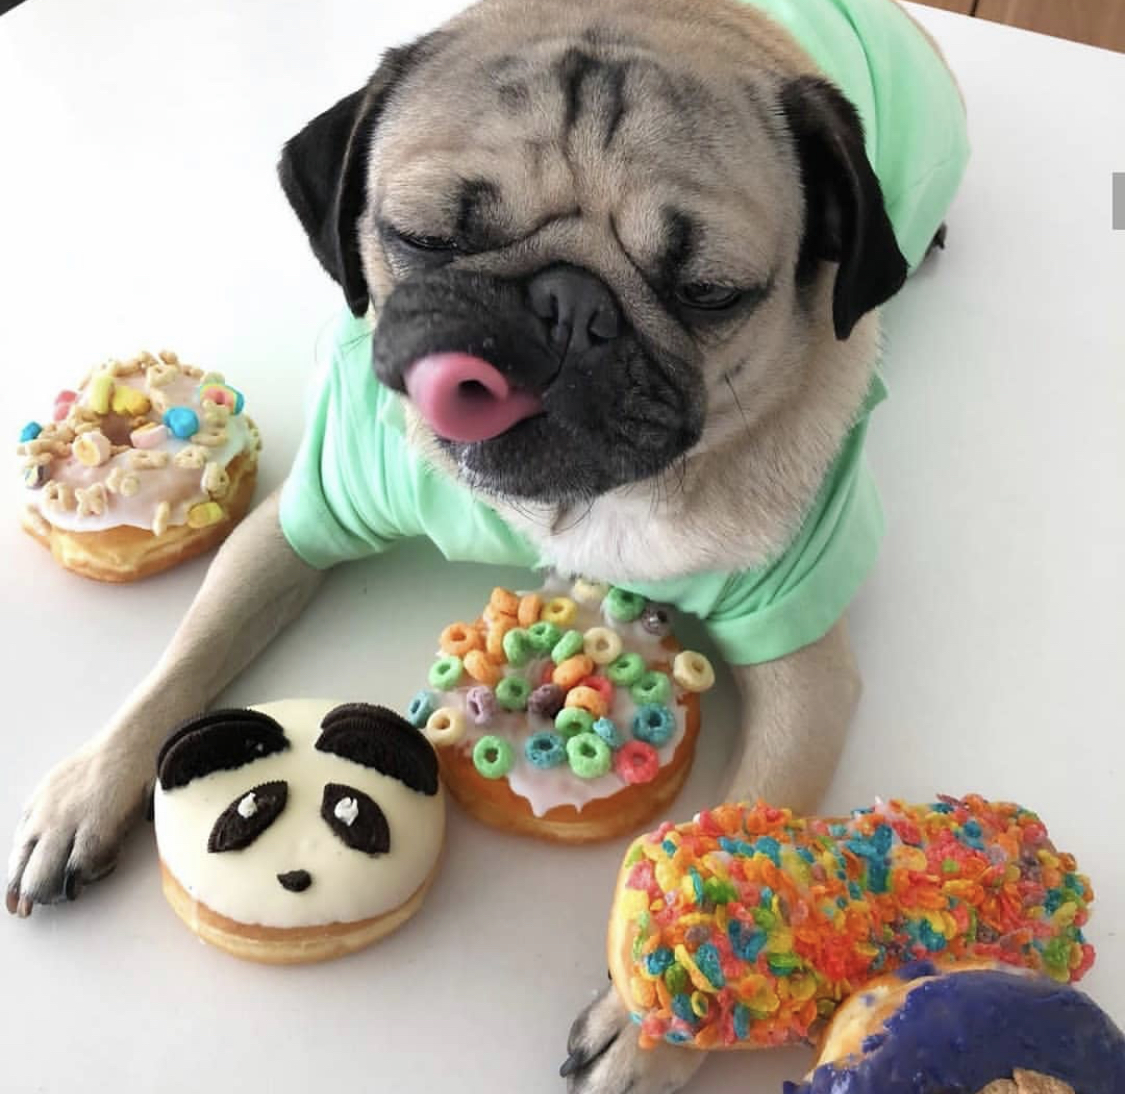 A Pug licking its mouth while lying on top of the table with donuts